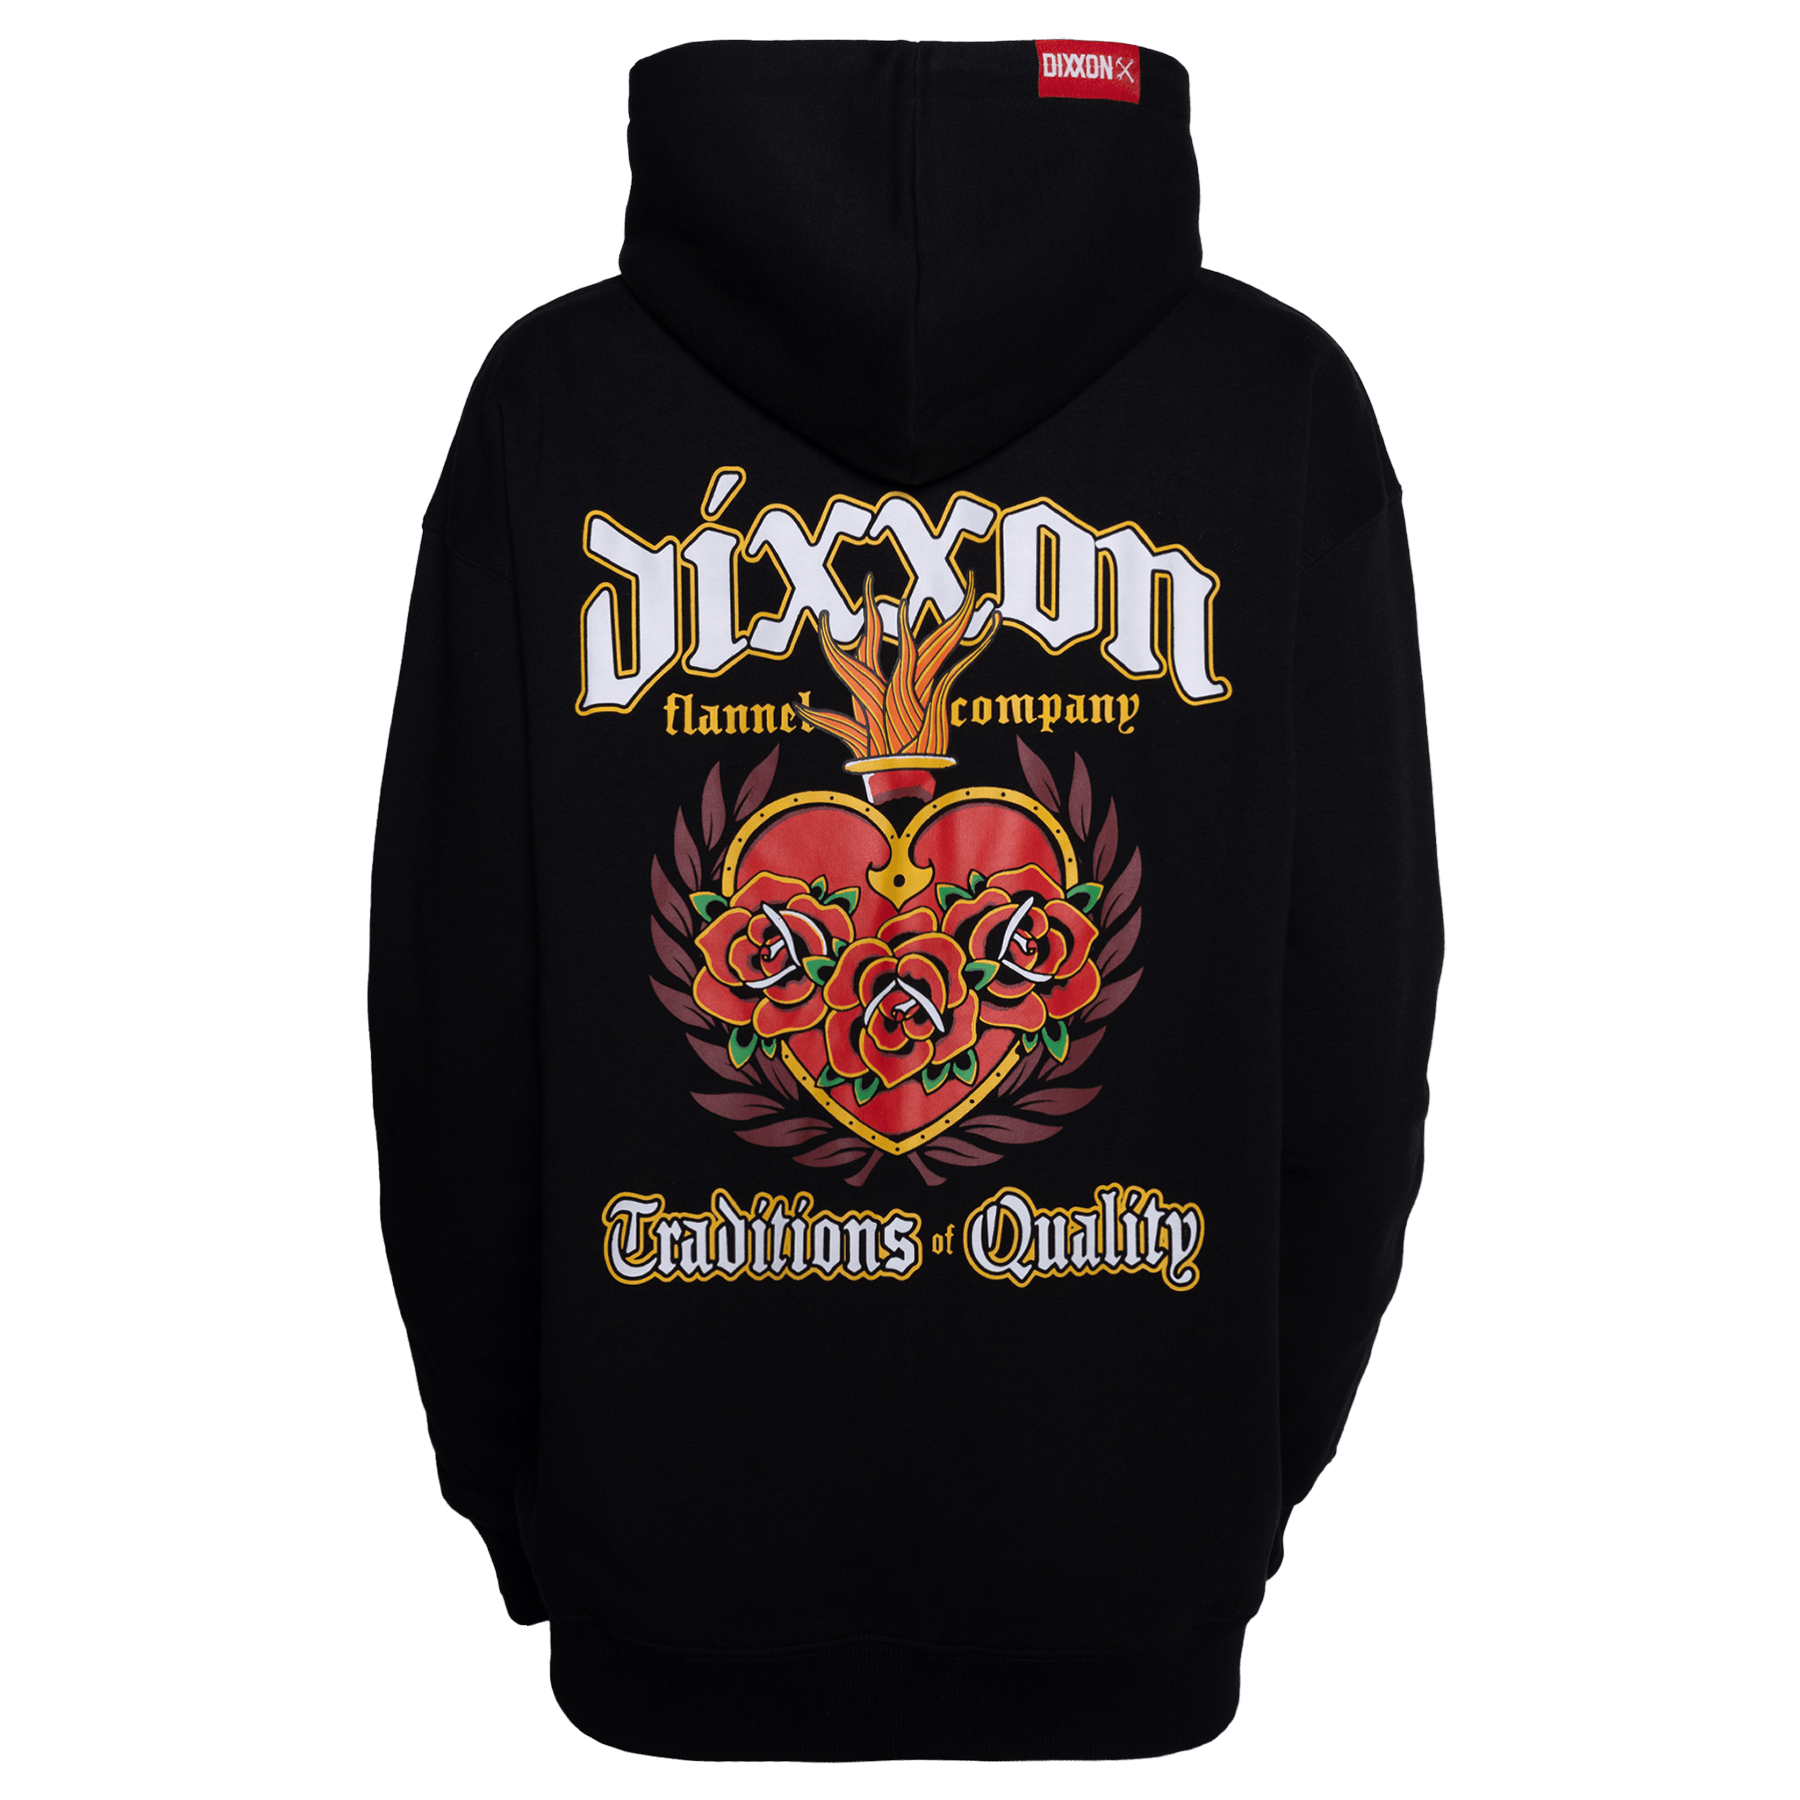 Women's Sacred Traditions of Quality Zip Up - Black - Dixxon Flannel Co.